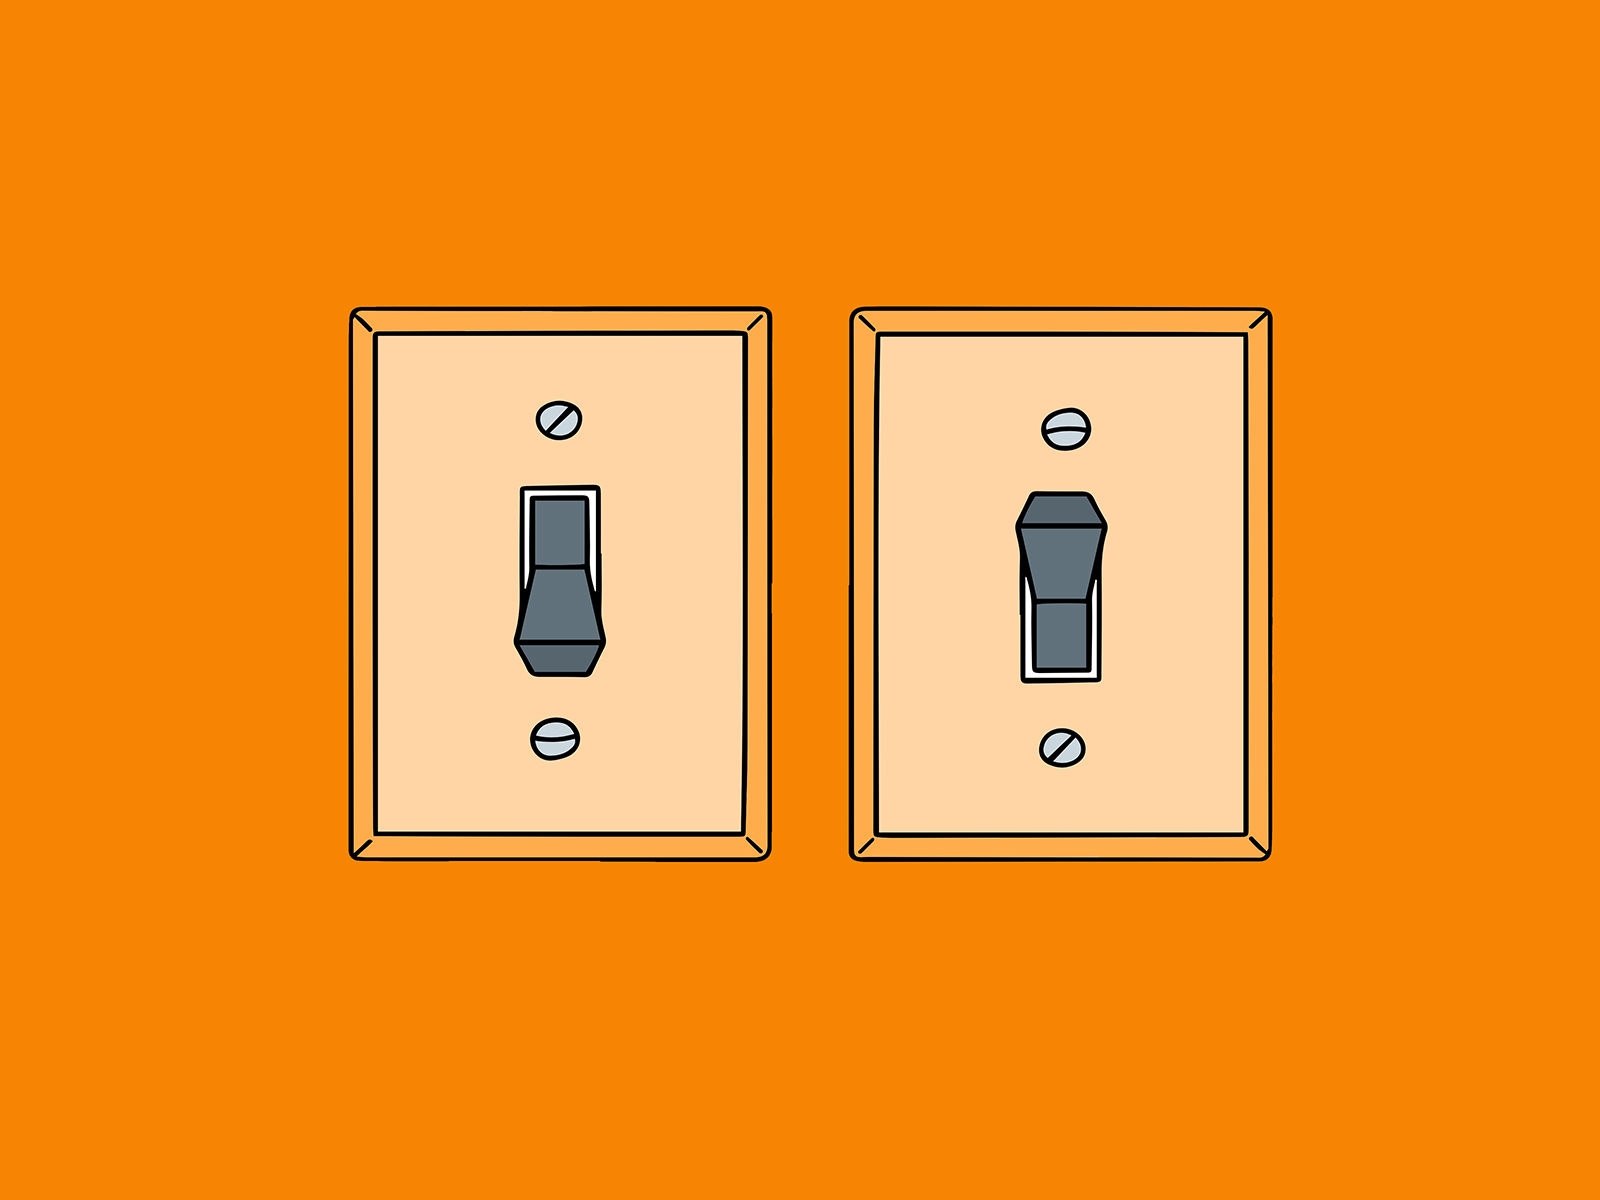 An illustration of two light switches, one on and one off.